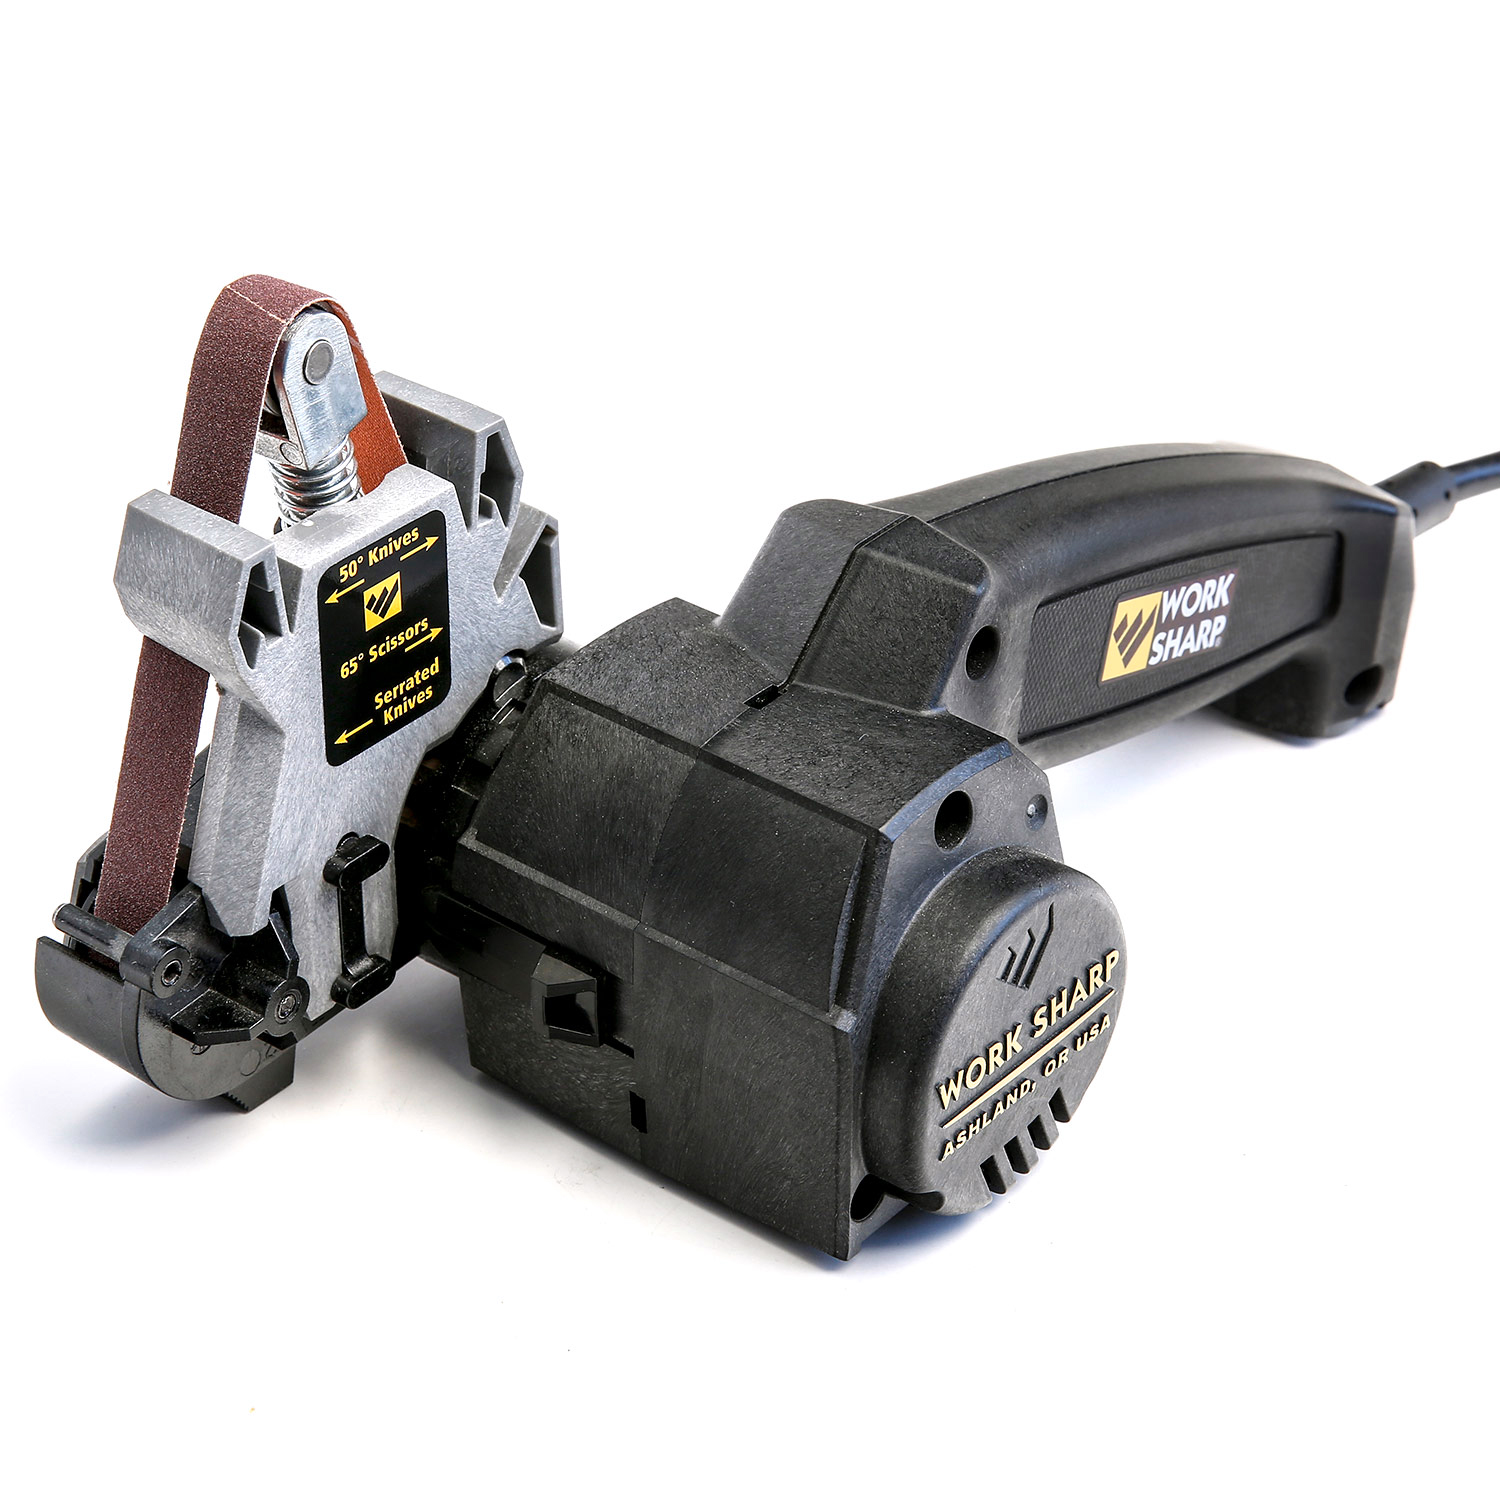 Accessories Category Page - Work Sharp Sharpeners